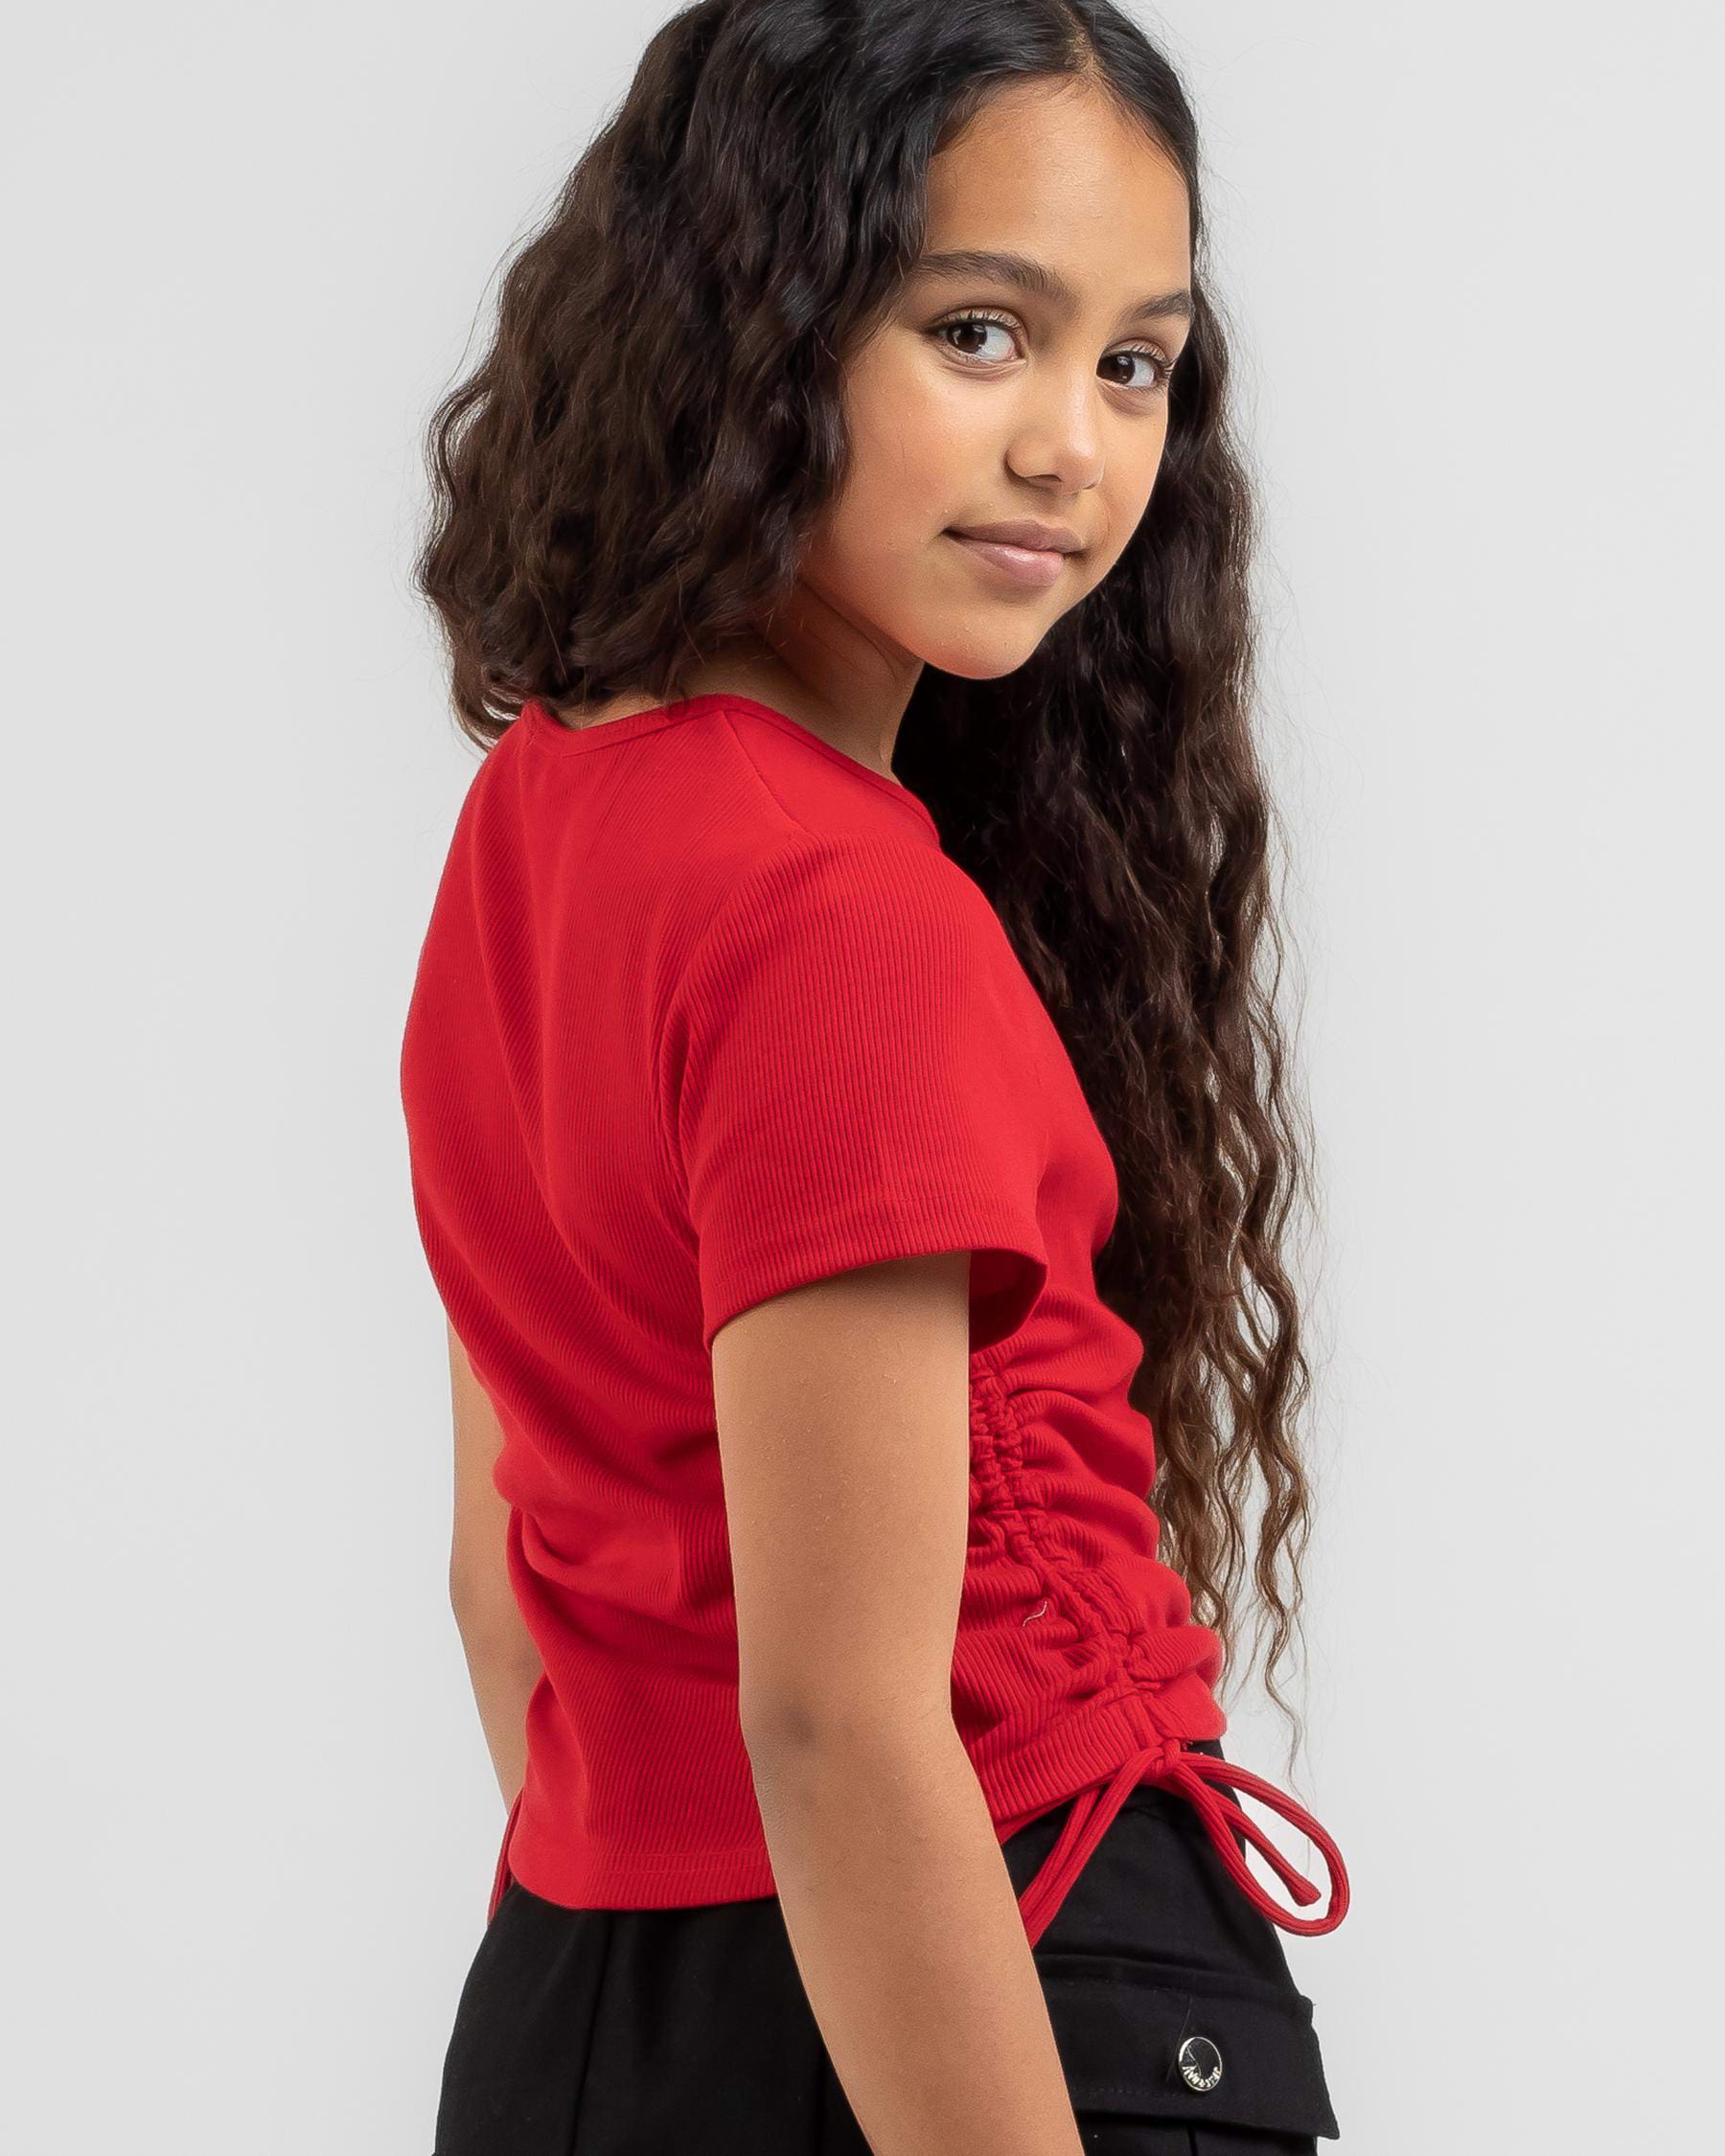 Ava And Ever Girls' Kenny Top In Red - Fast Shipping & Easy Returns ...